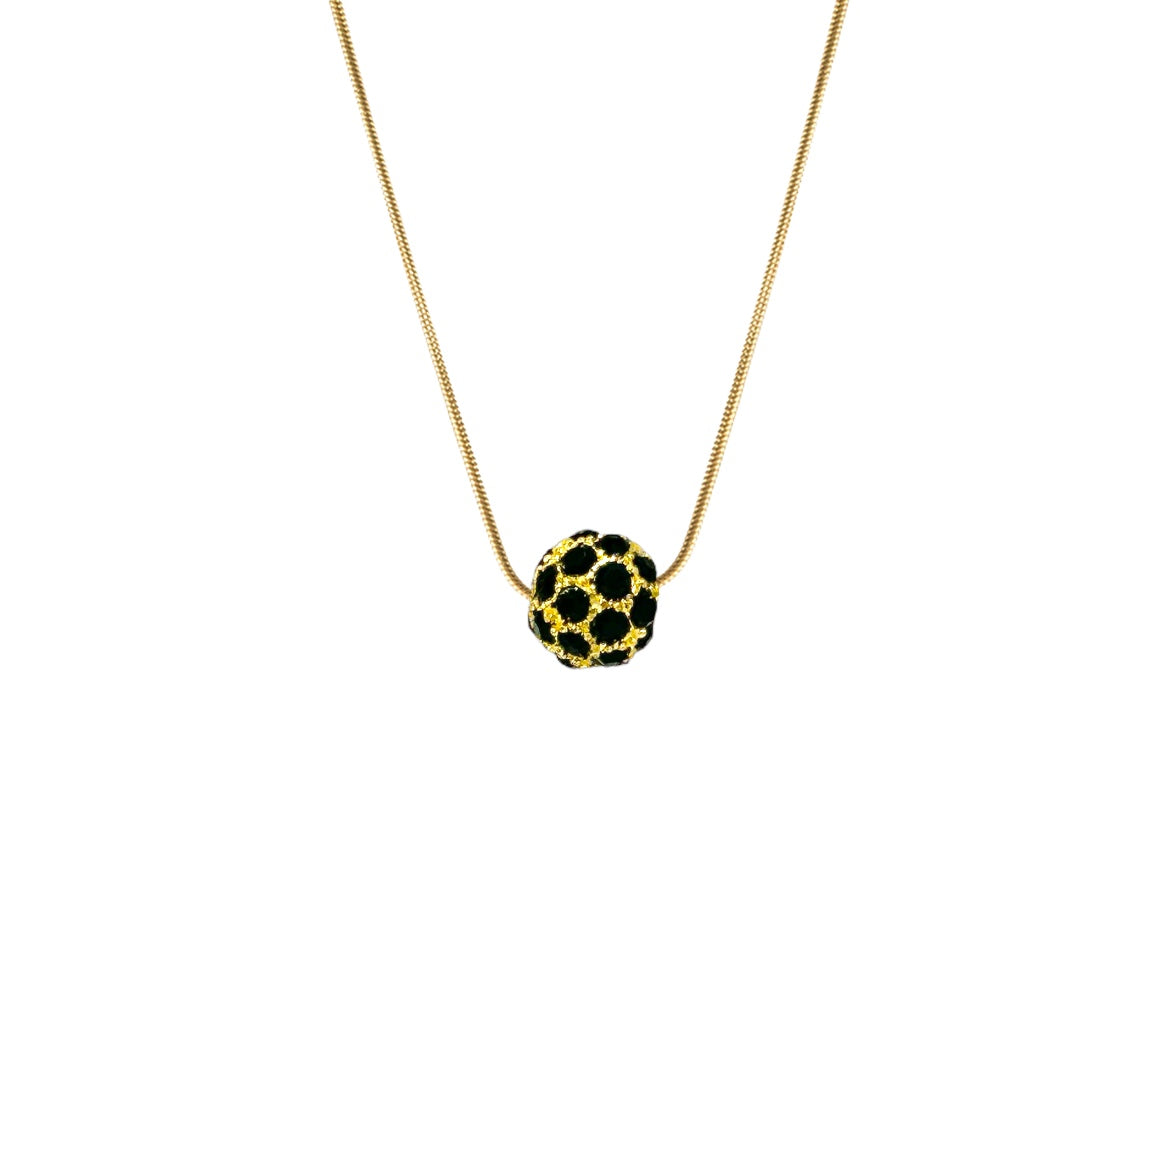 Kenzie Necklace - Black with Gold